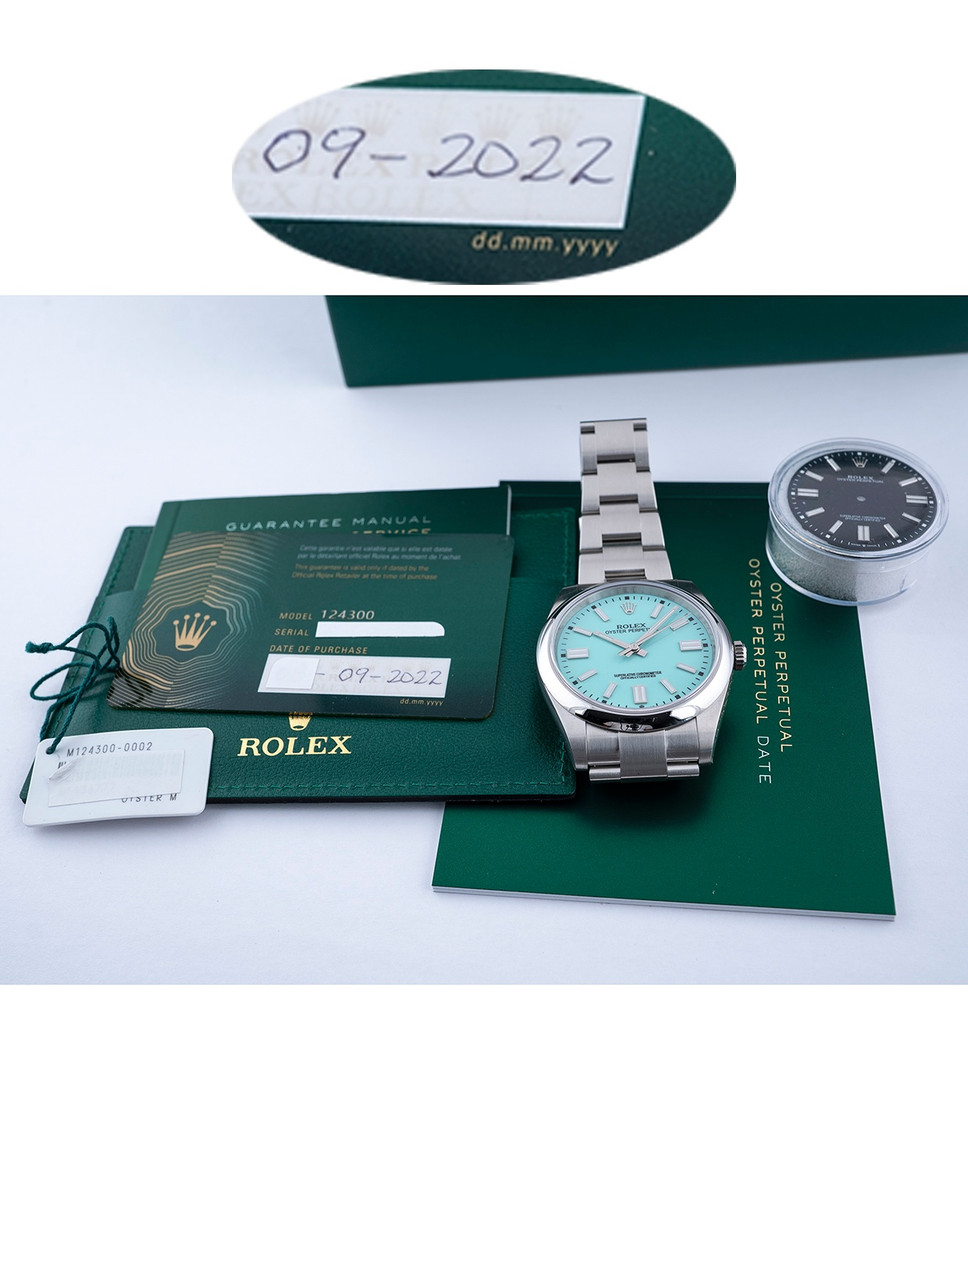 Rolex Oyster Perpetual 41 Stainless Steel - Green Index Dial - Oyster Bracelet (Ref#124300)